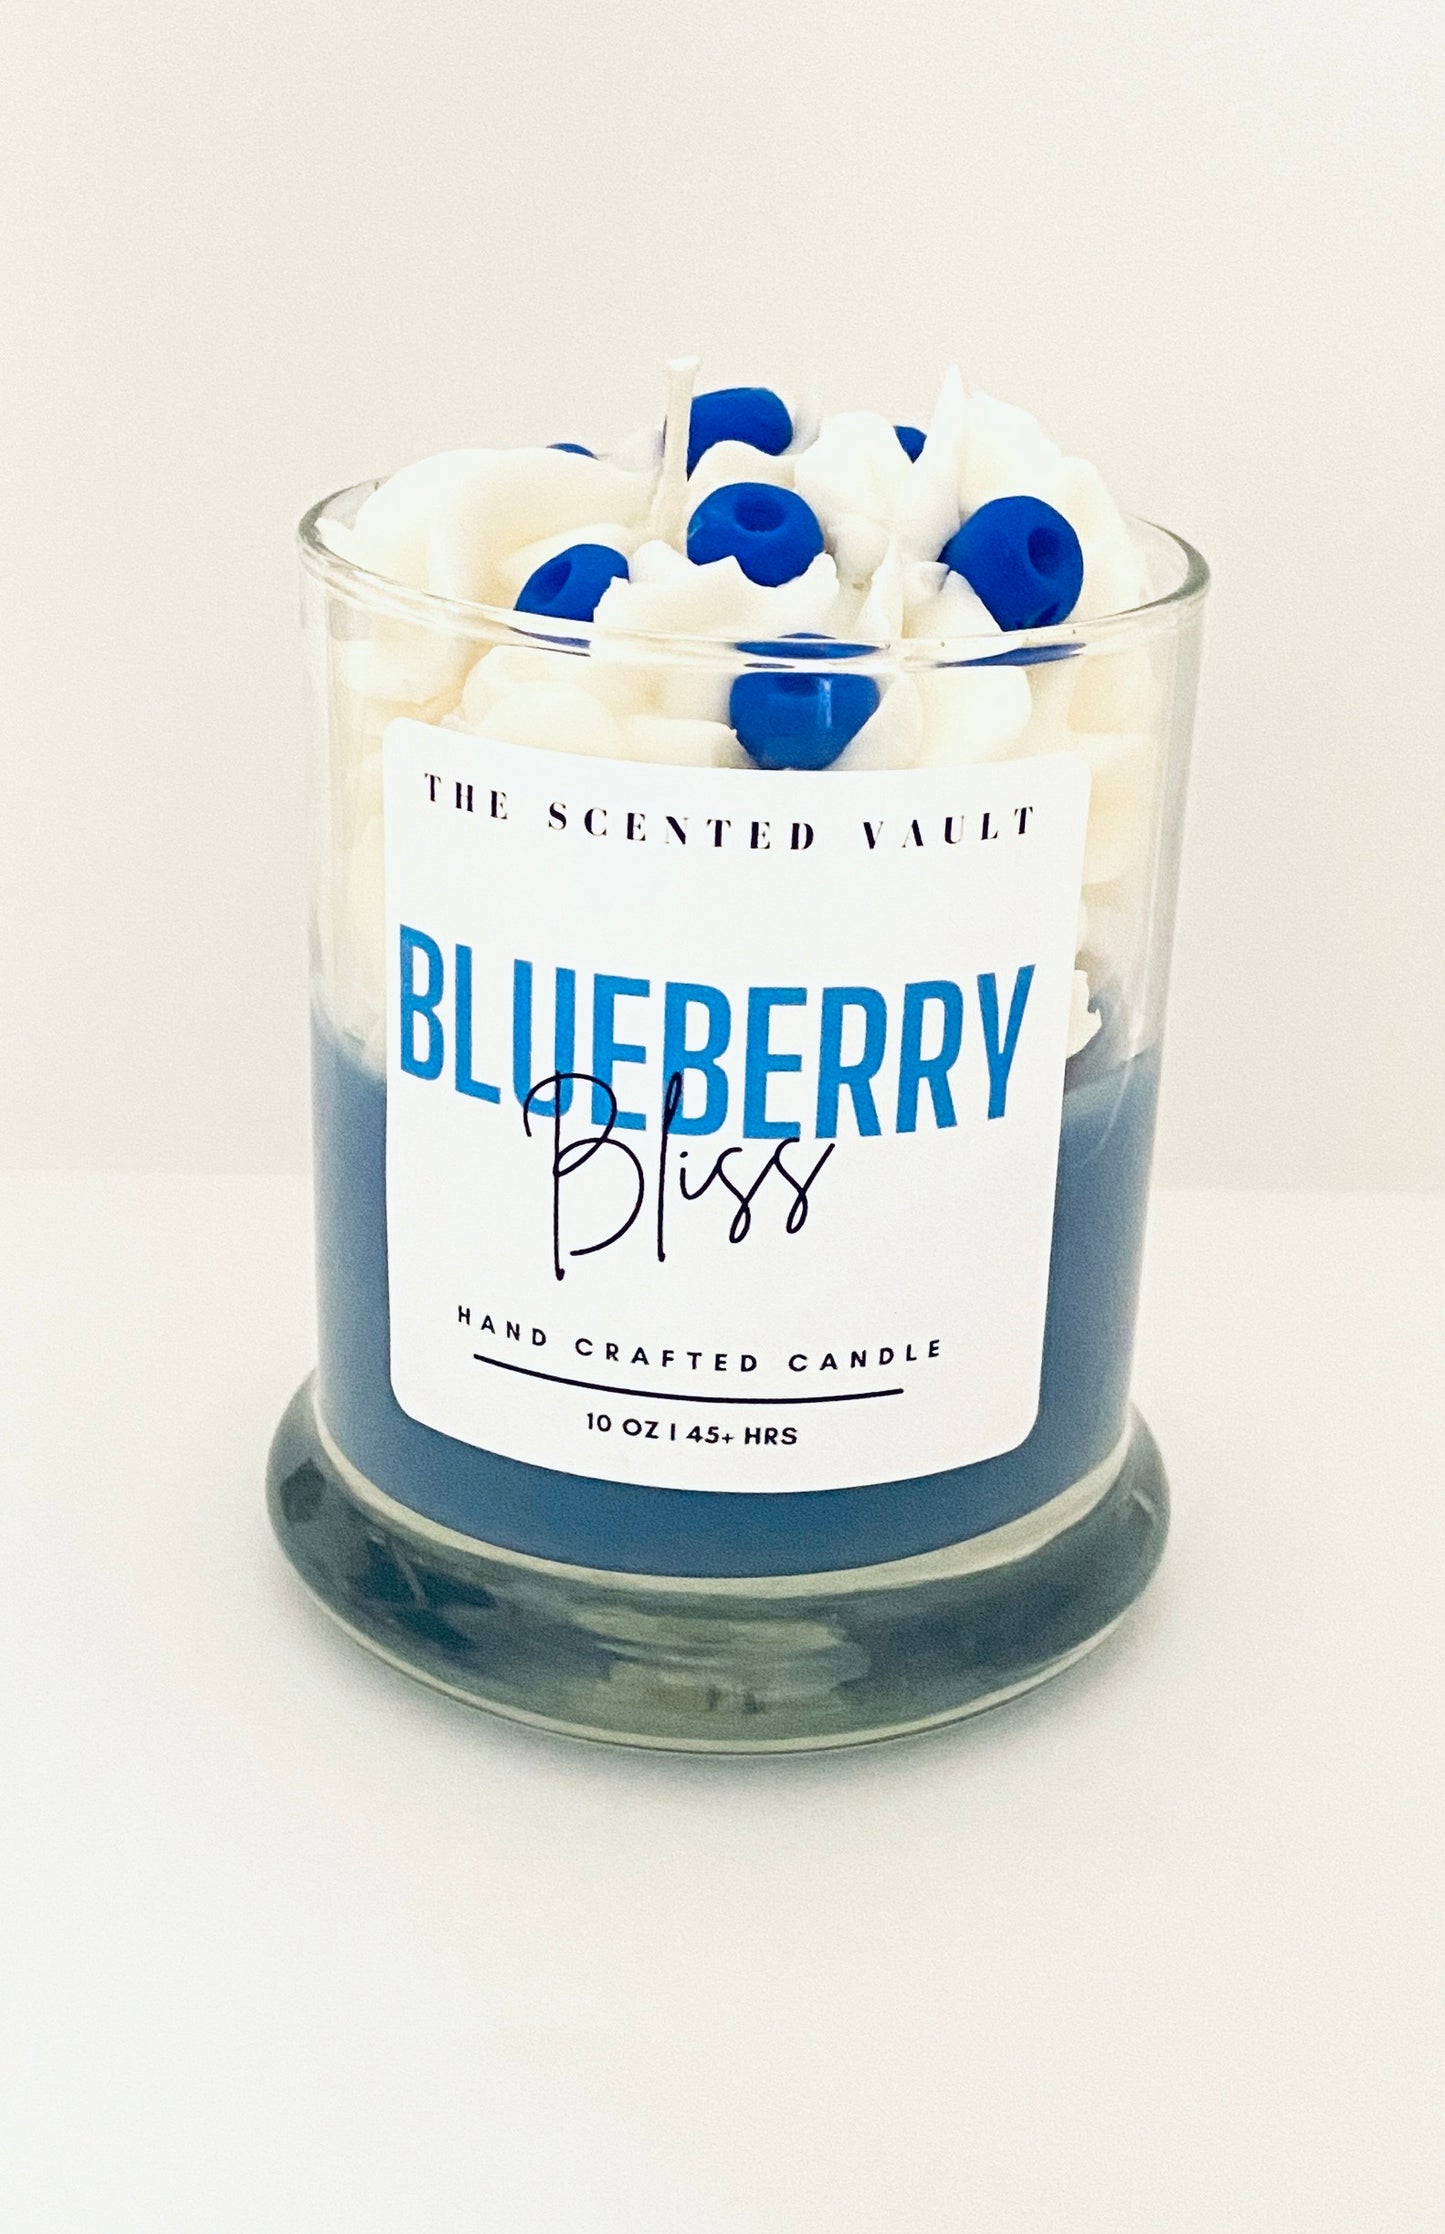 Blueberry Bliss Scented Candle